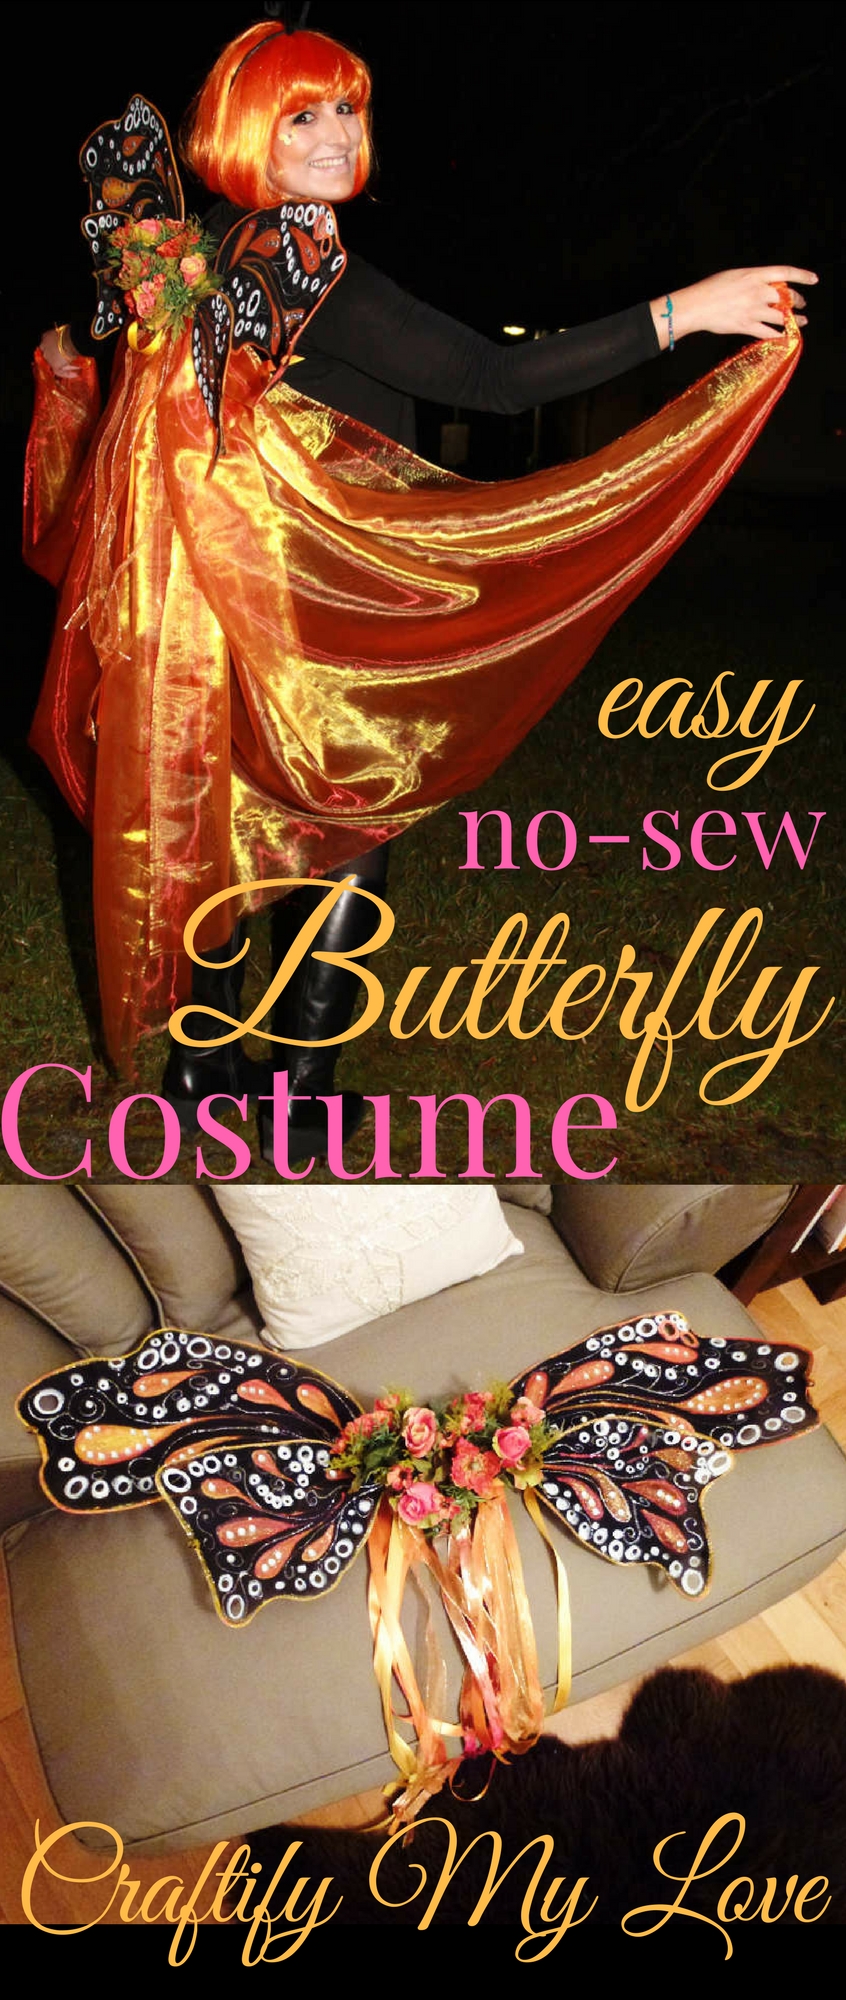 Like this Halloween costume idea for a butterfly or fairy? Make easily your own with this free tutorial!